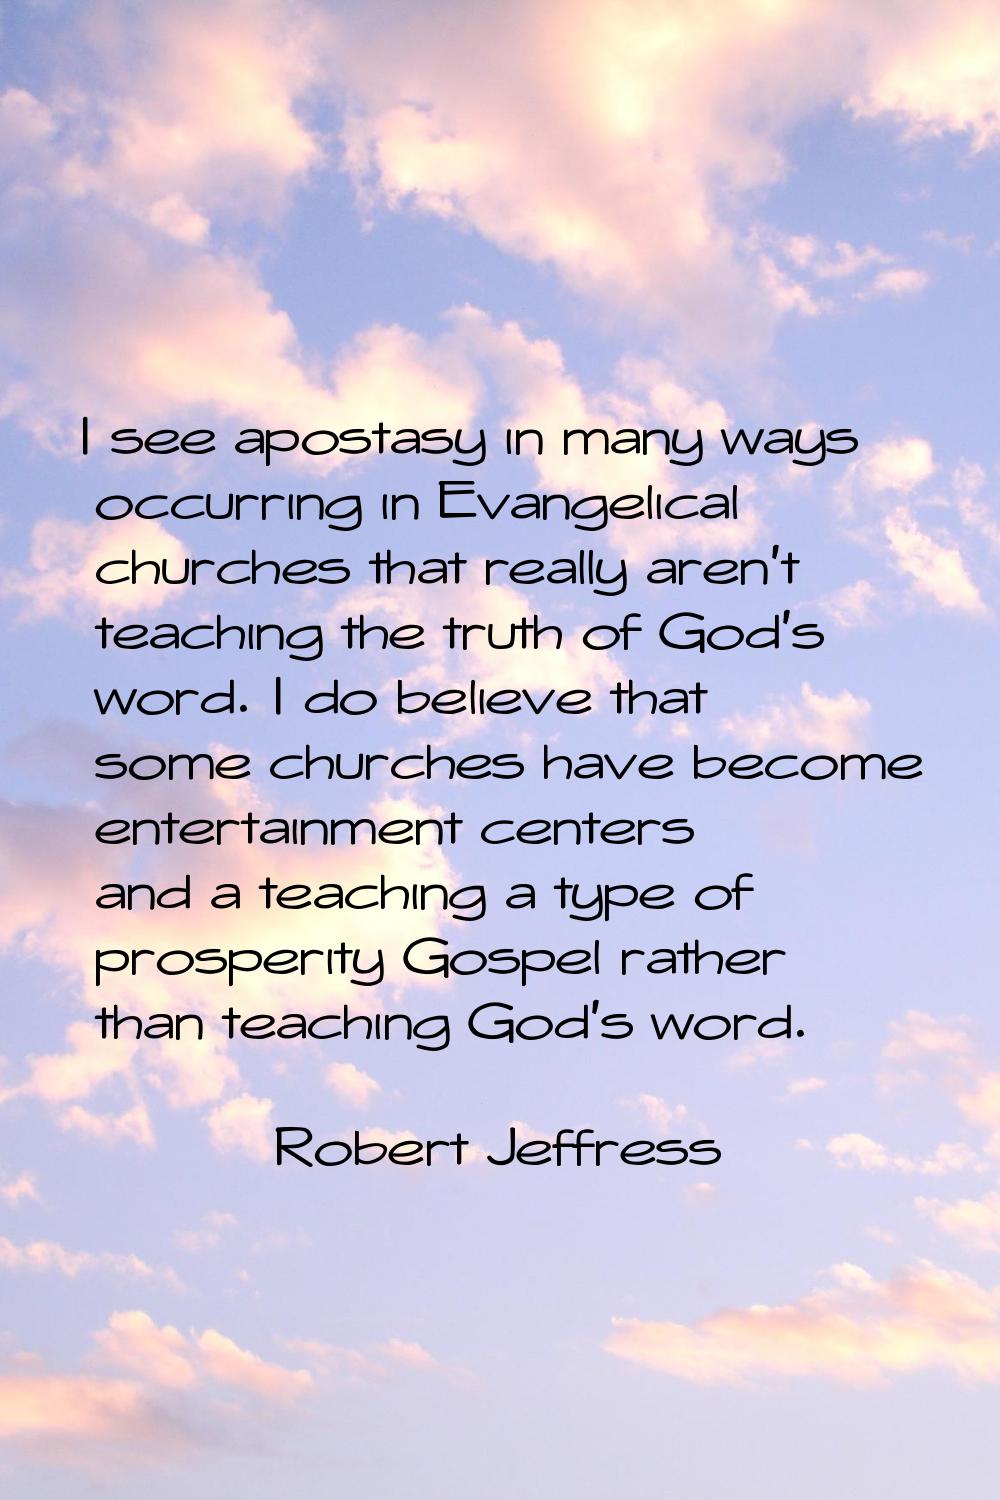 I see apostasy in many ways occurring in Evangelical churches that really aren't teaching the truth